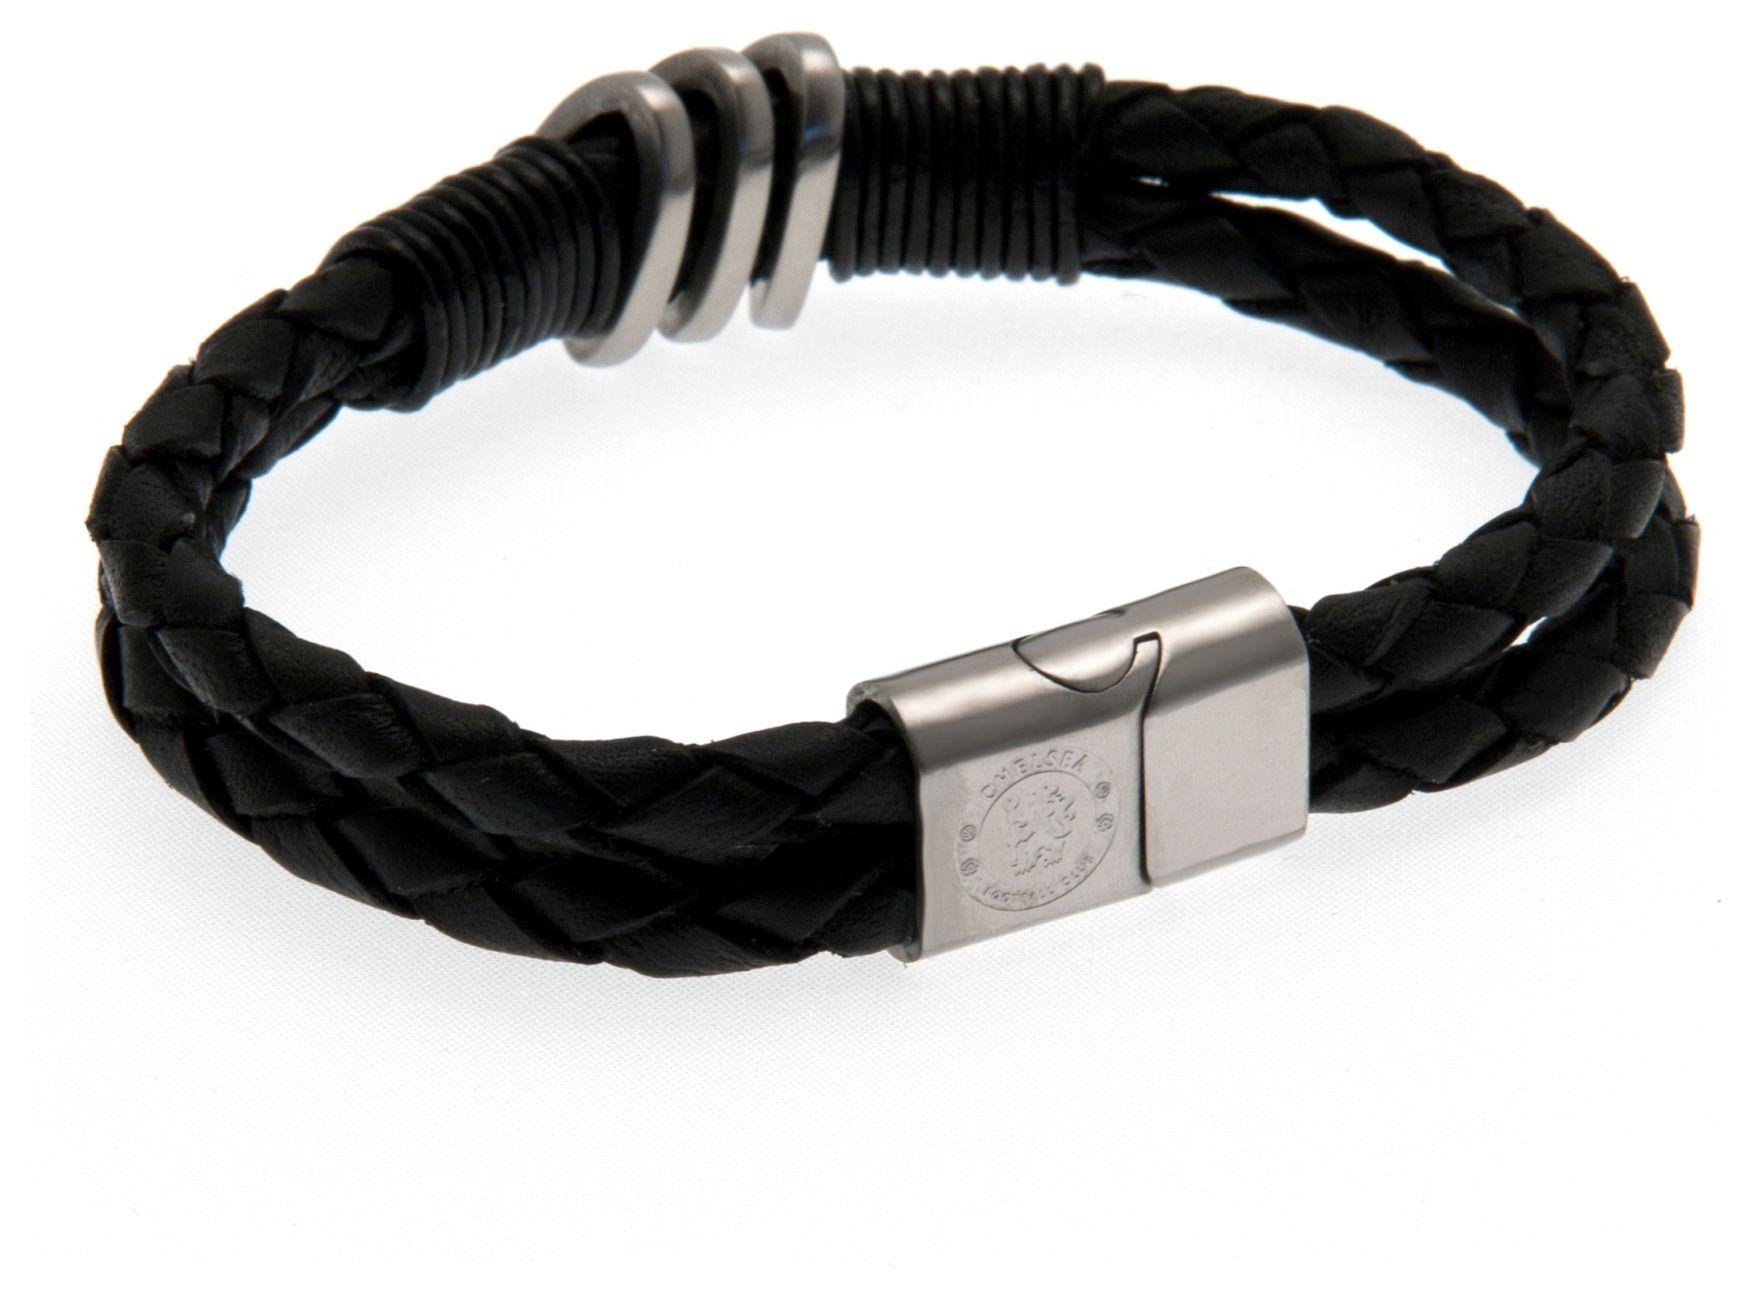 Stainless Steel and Leather Chelsea Bracelet.